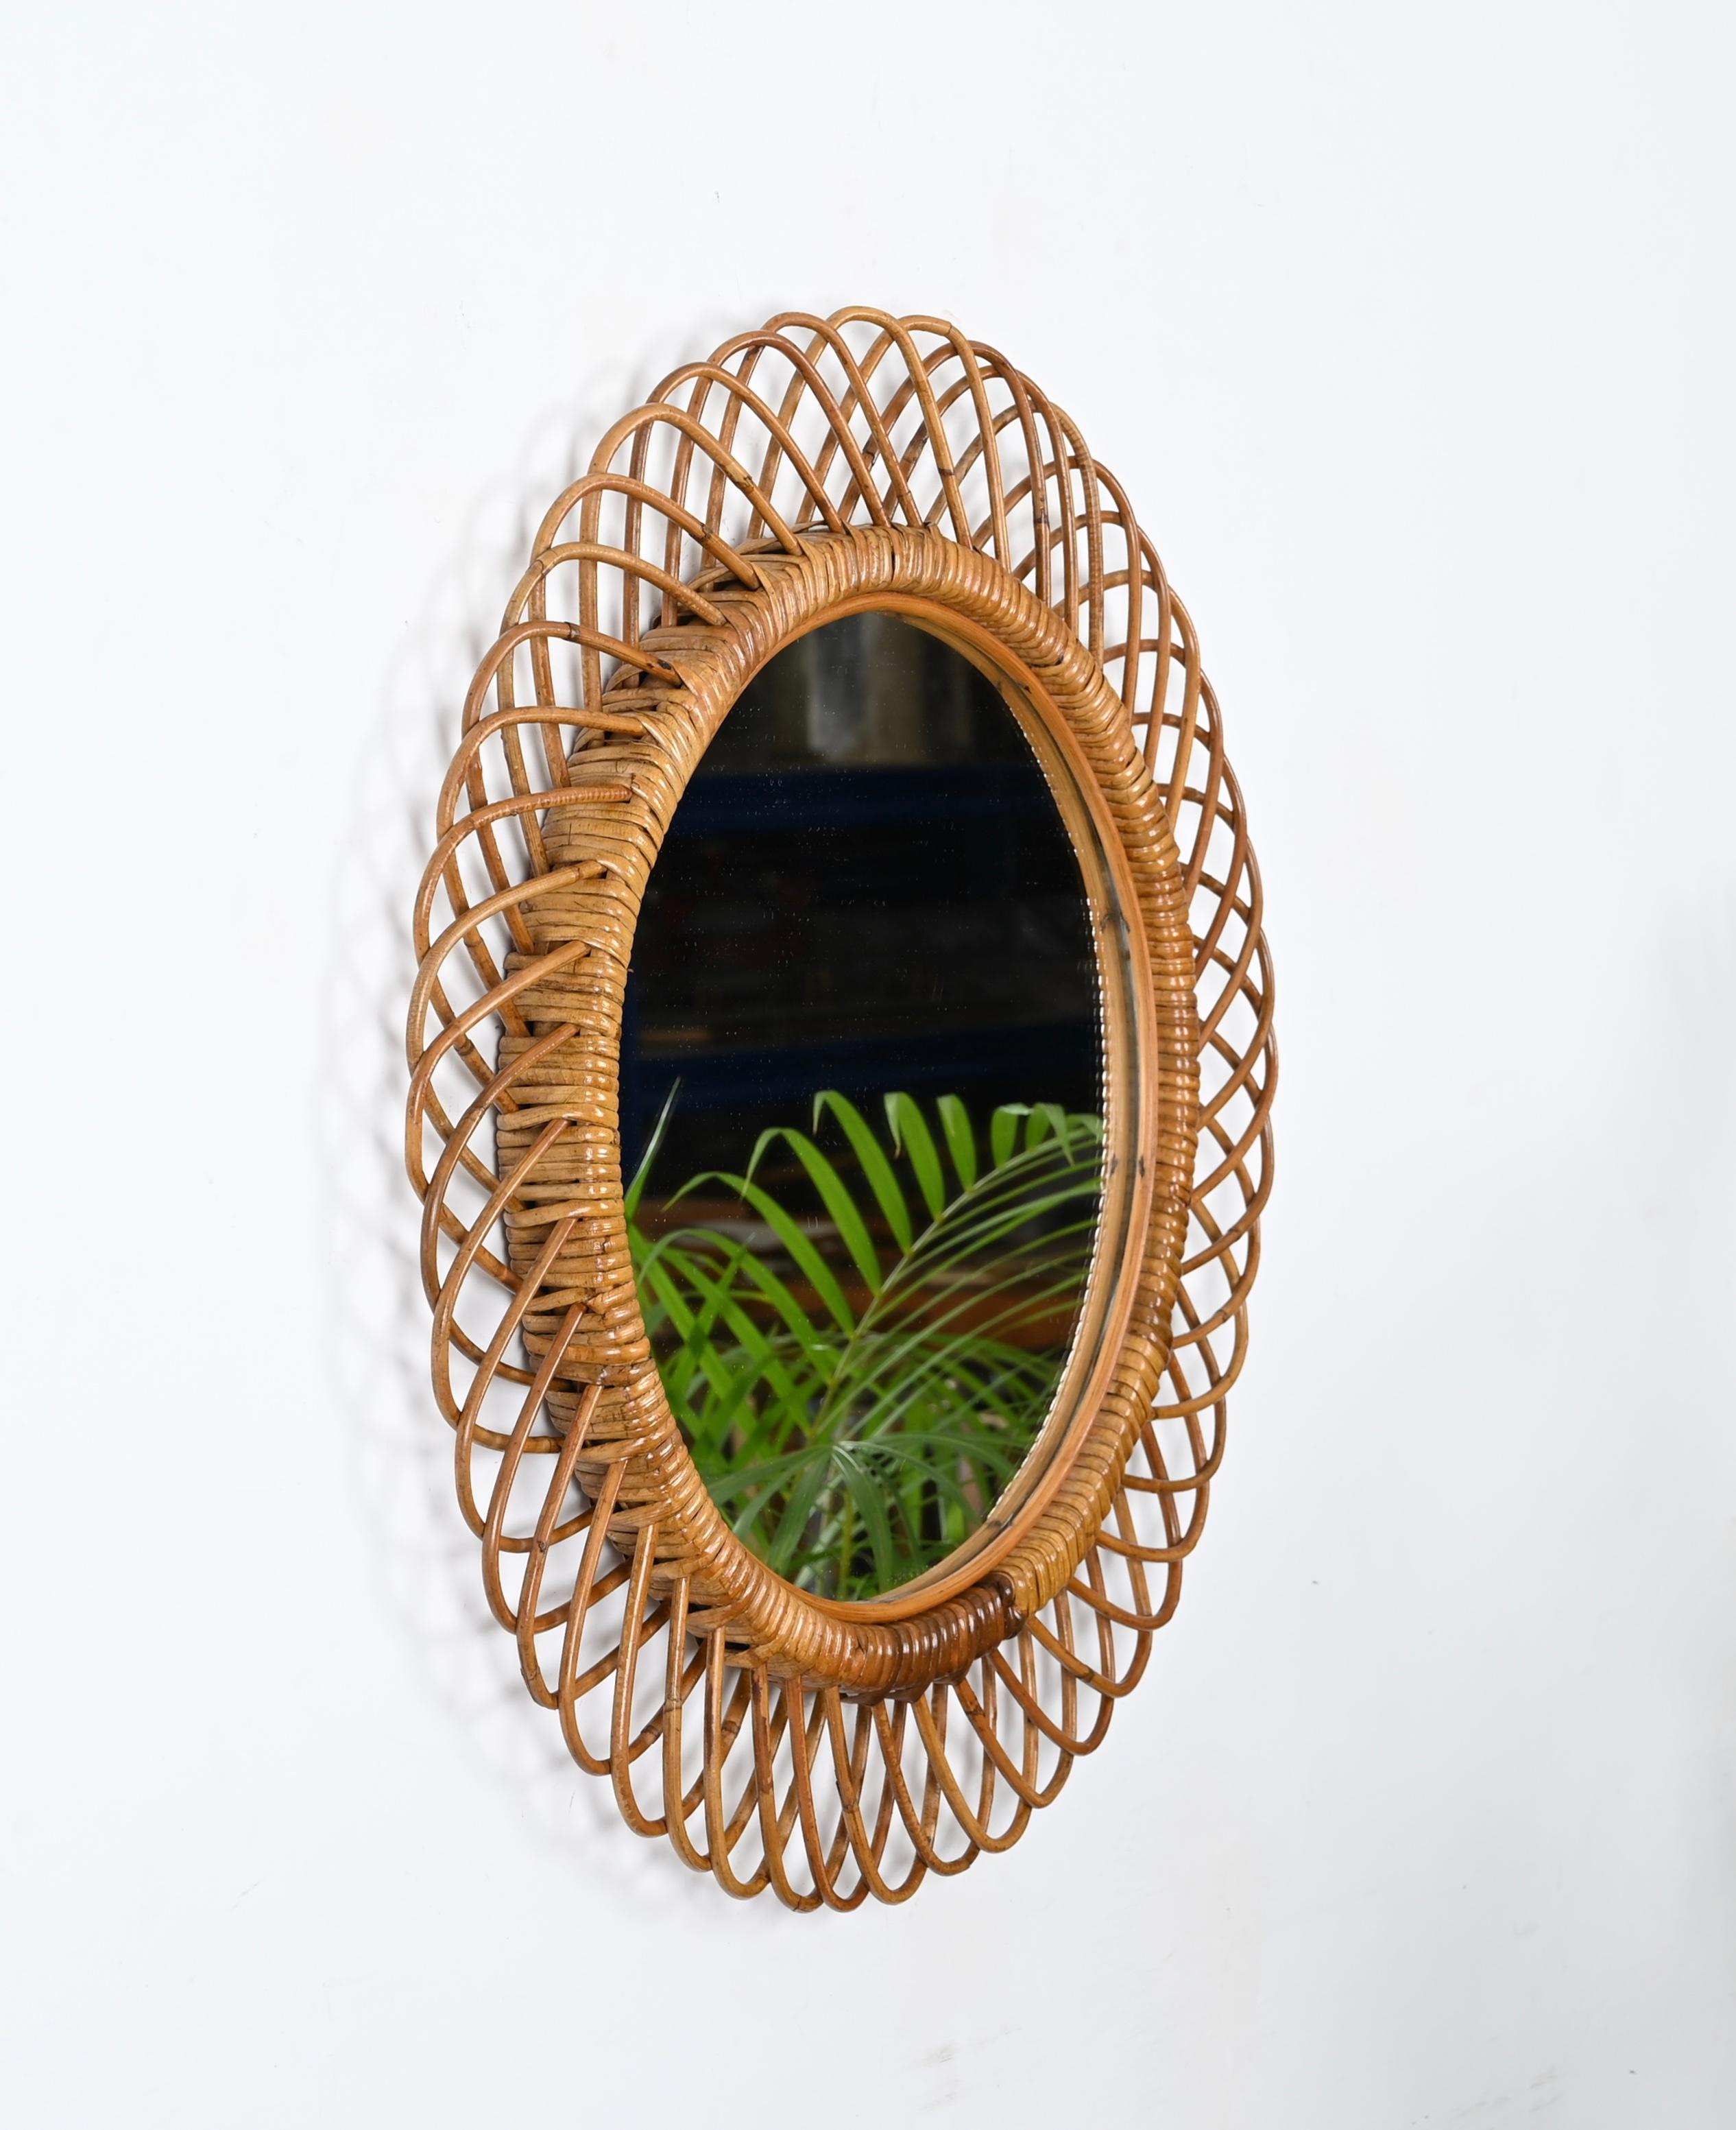 Fantastic midcentury French Riviera style round mirror in curved rattan, bamboo and hand-woven wicker. This stunning piece is attributed to the mastery of Franco Albini and was produced in Italy during the 1960s.

The mirror frame is decorated with